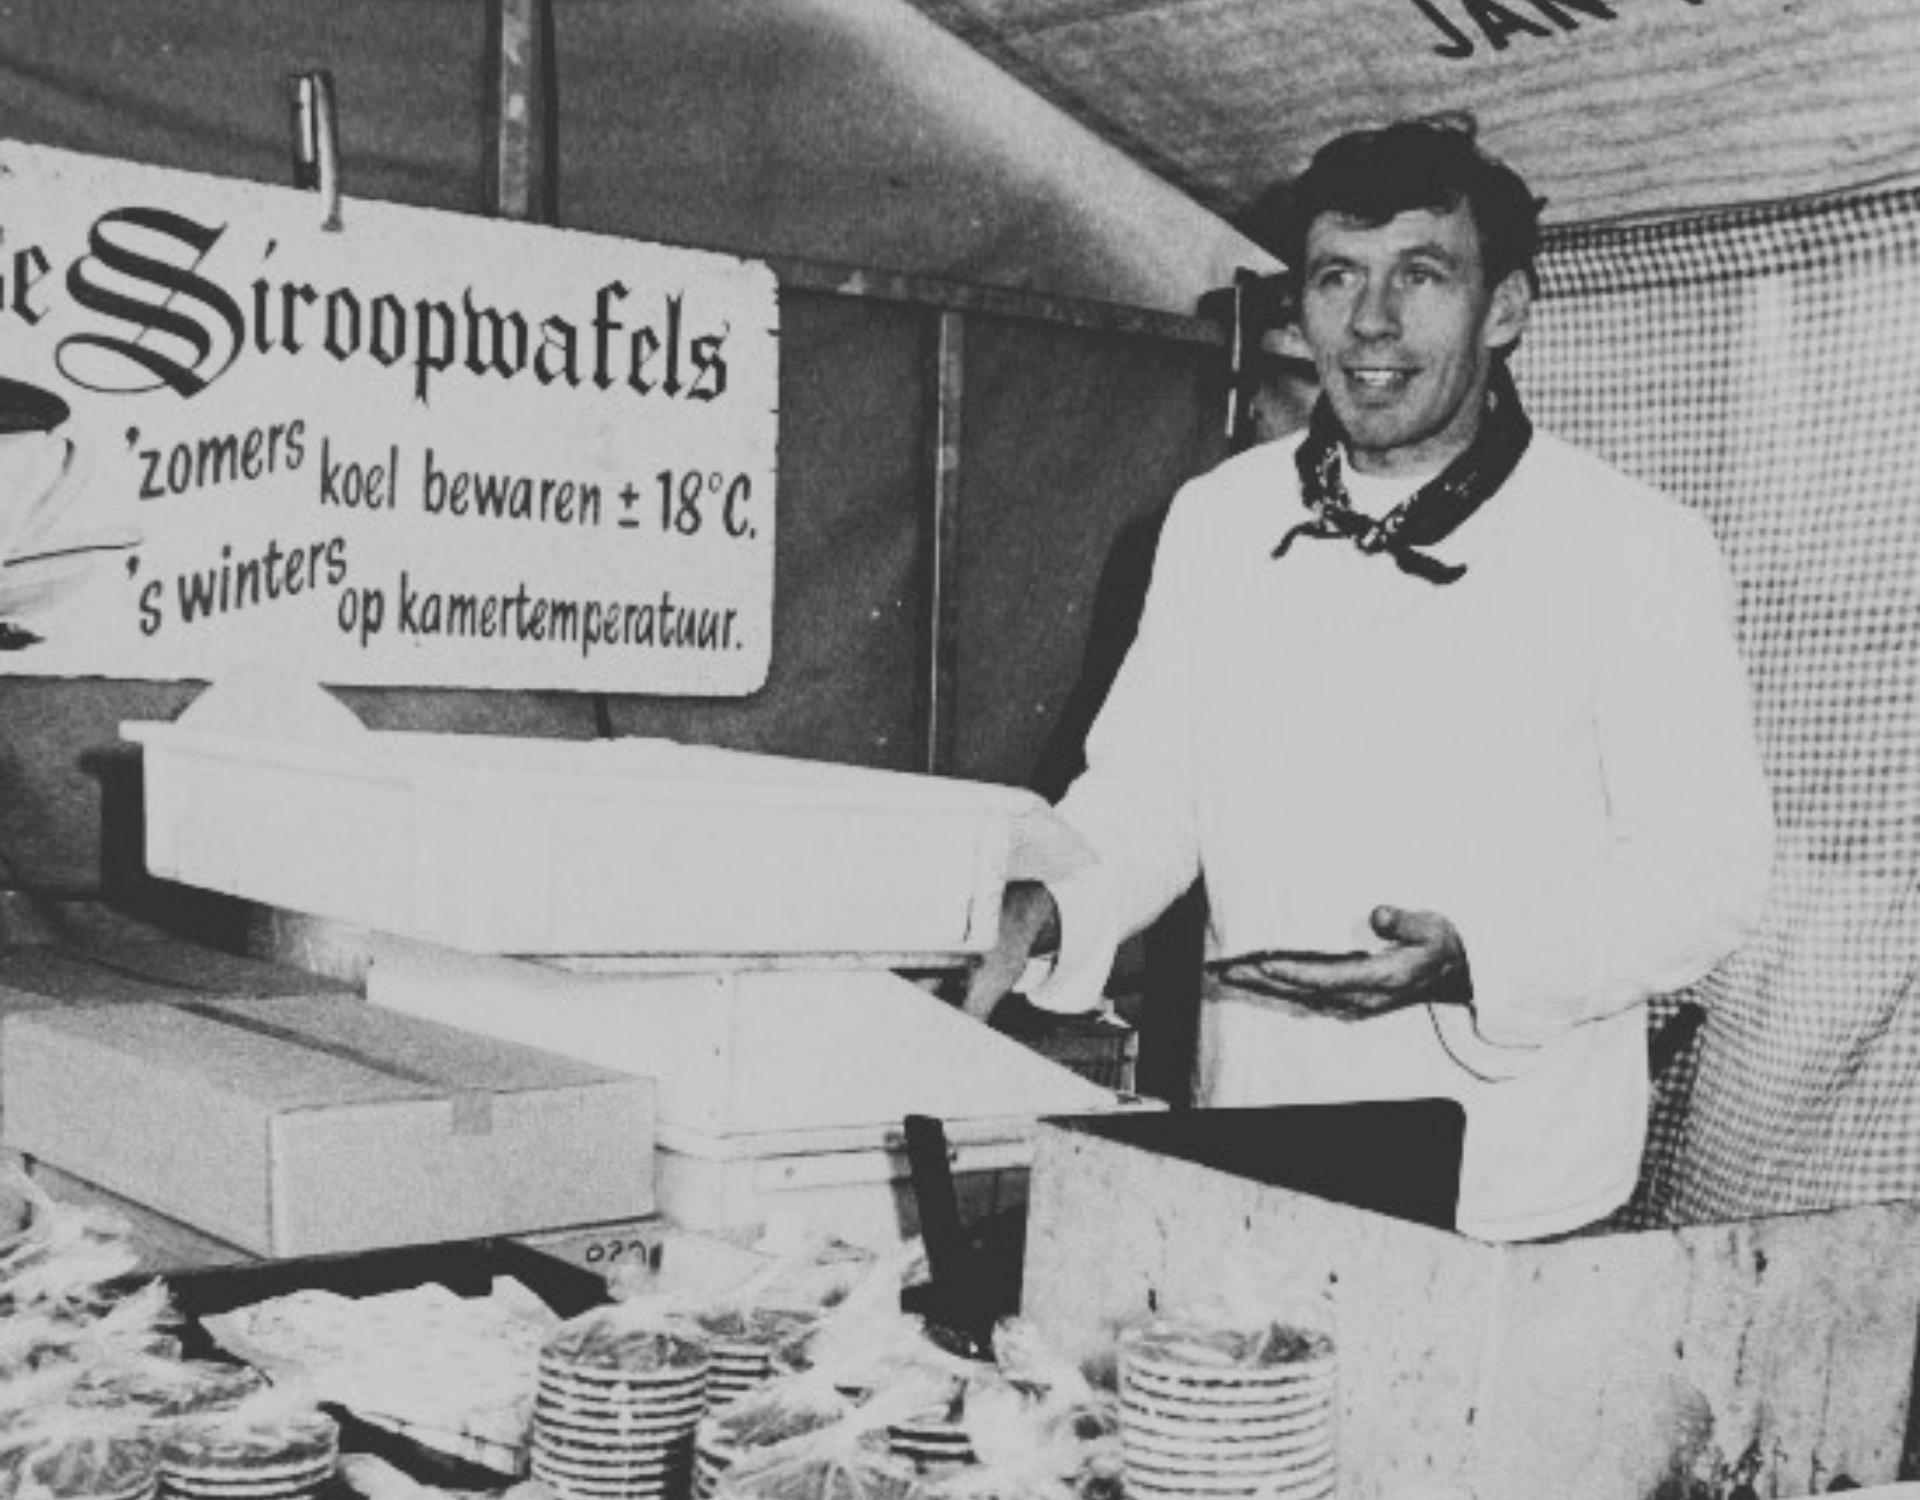 A Dutch stroopwafel maker selling his fresh stroopwafels at an Amsterdam market stand